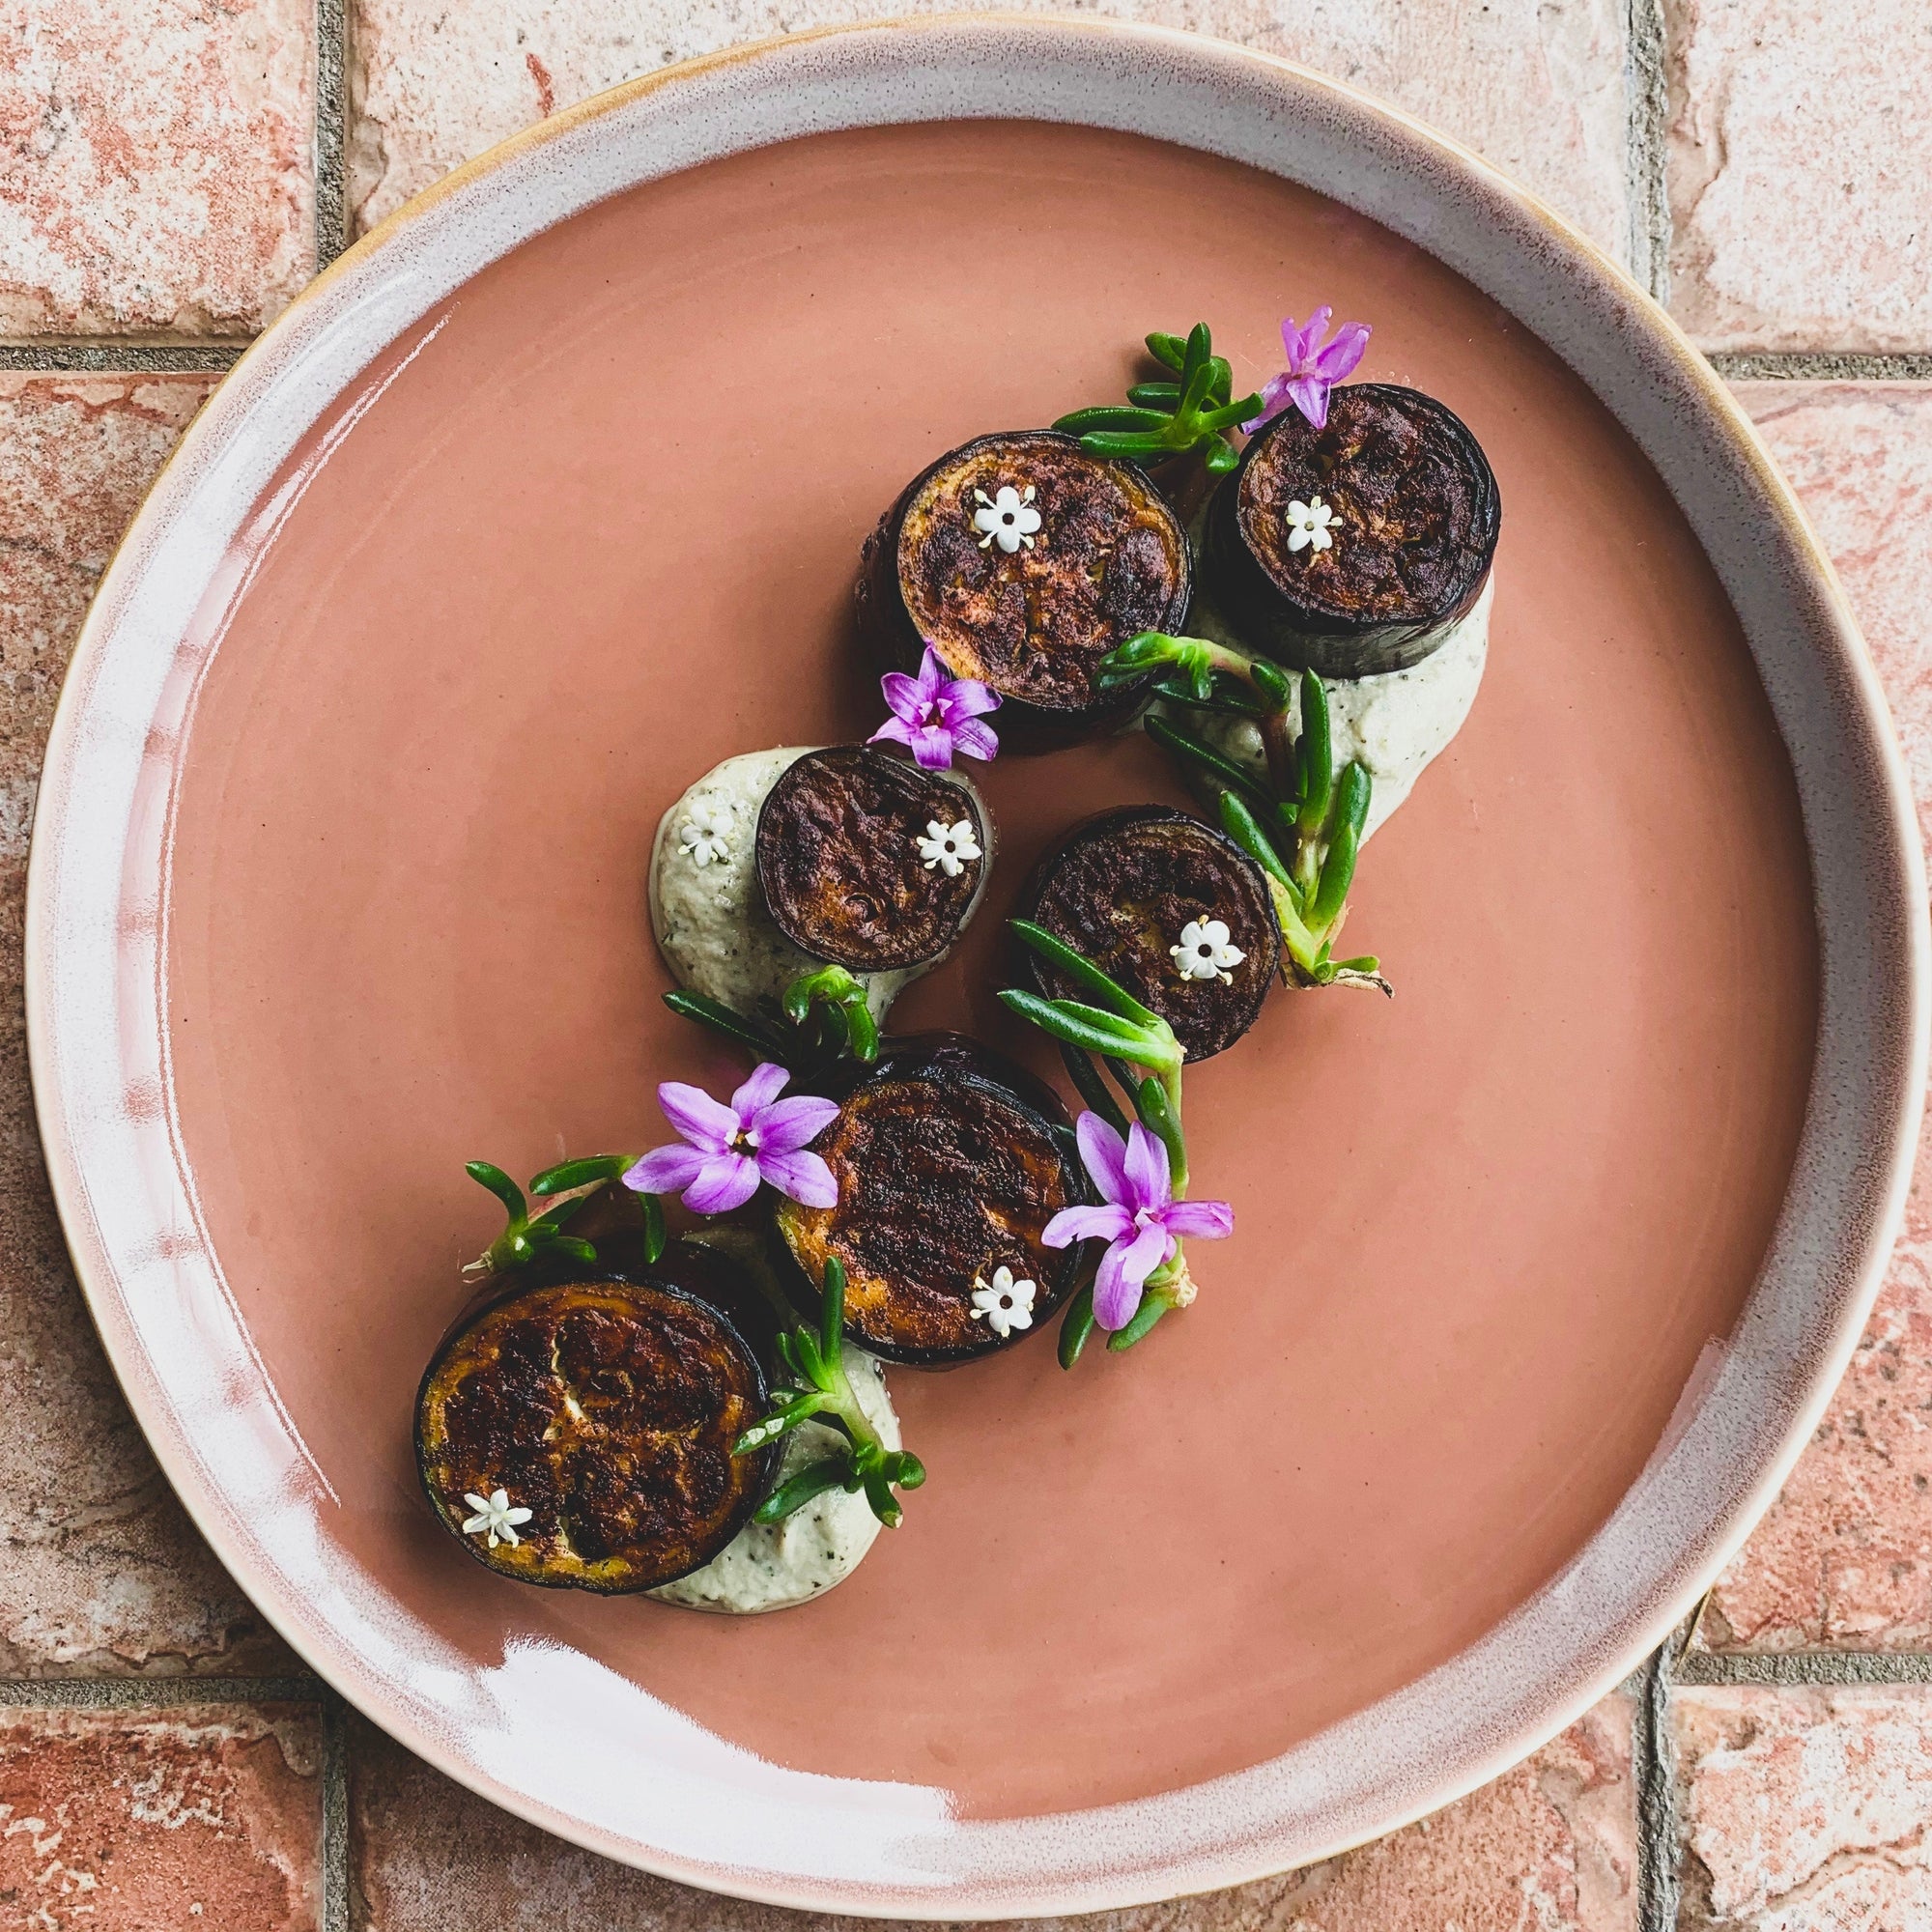 Eggplant Karkalla Recipe with Mountain Pepperleaf and Society Garlic Flowers